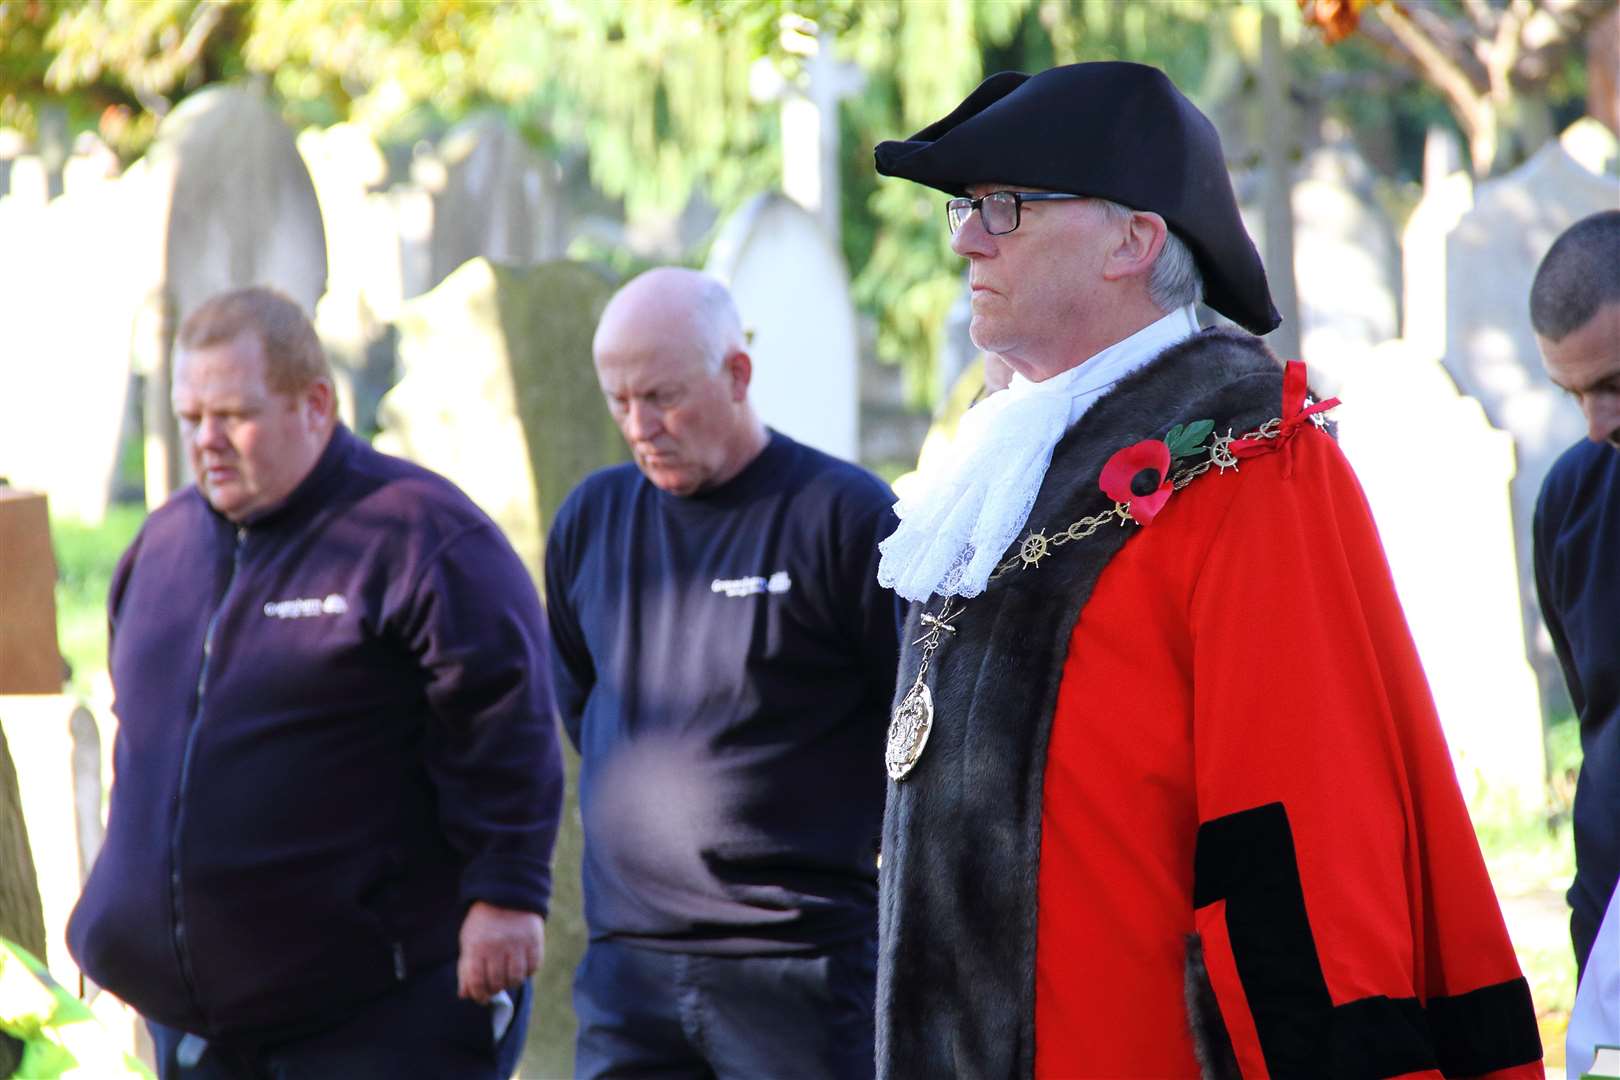 Mayor of Gravesham, Cllr David Hurley, paid his respets at the memorials. Picture: Gravesham Borough Council.